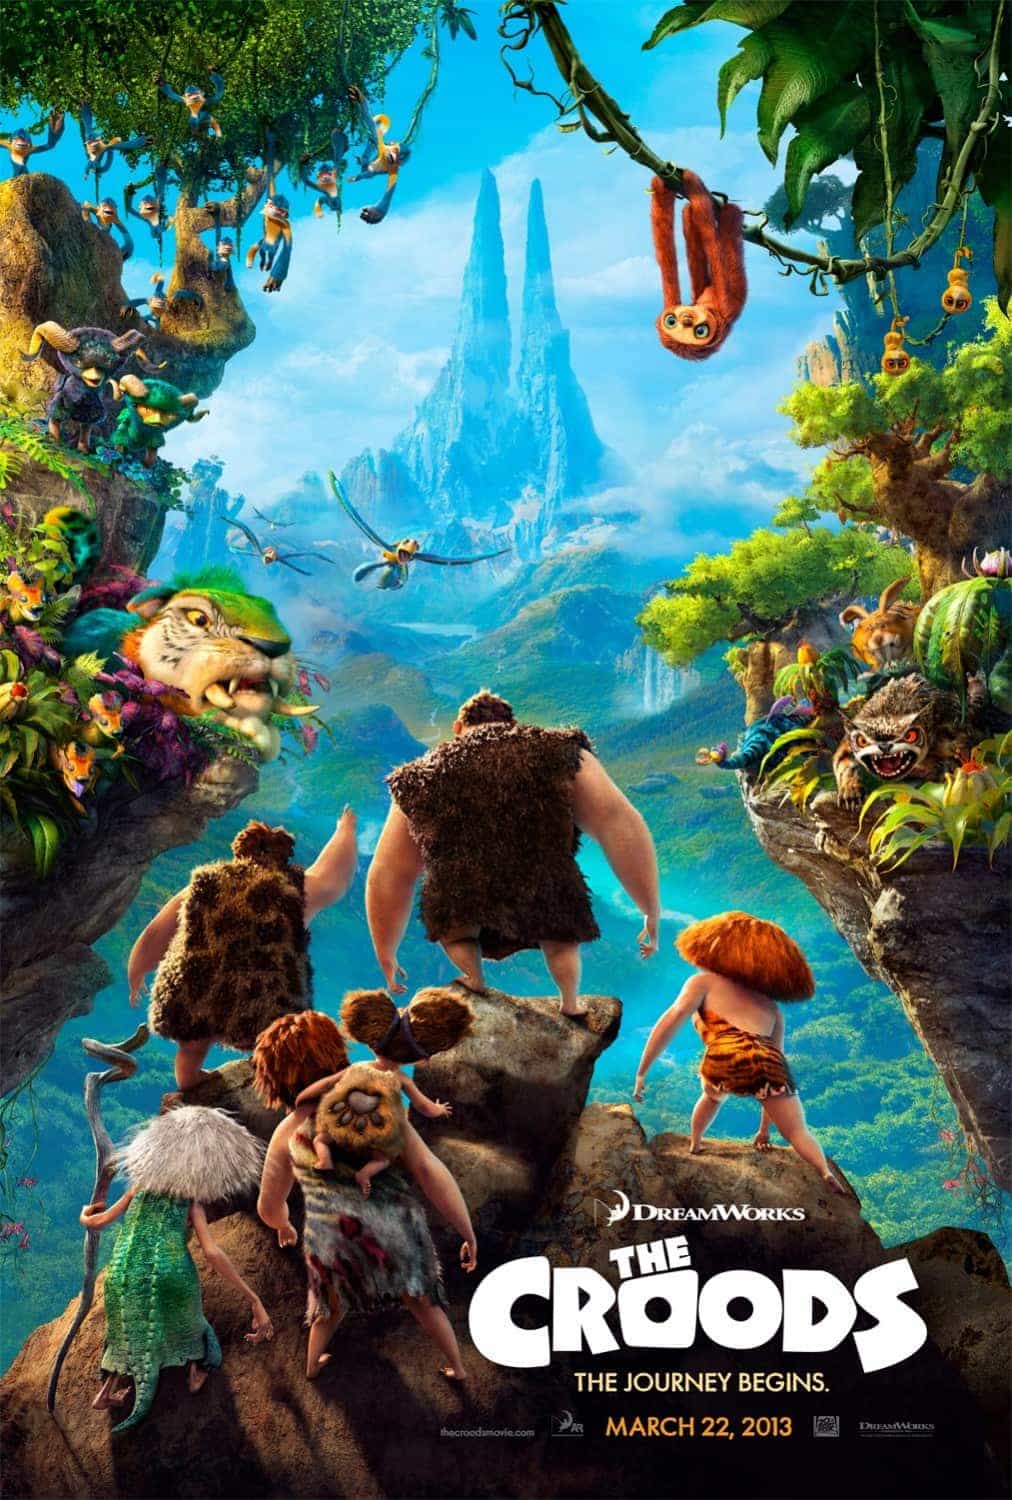 UK box office report: All change at the top with The Croods winning the top spot